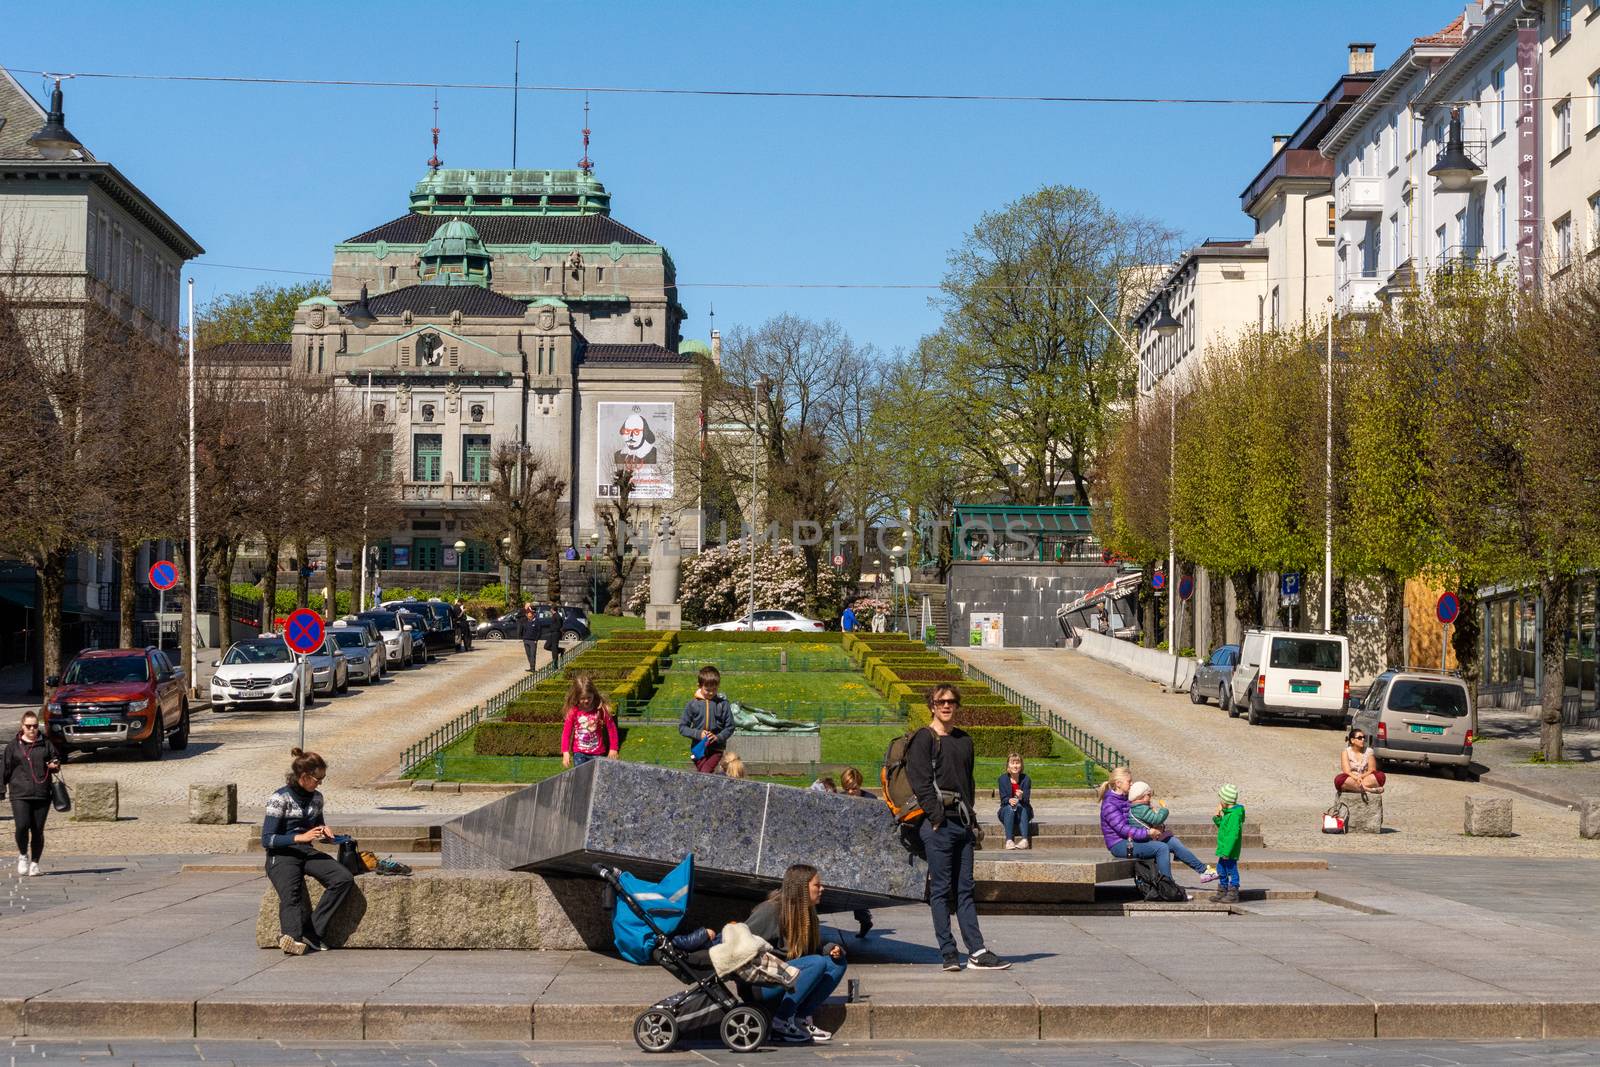 View on Ole Bull Plass street and park in Bergen, Norway by kb79